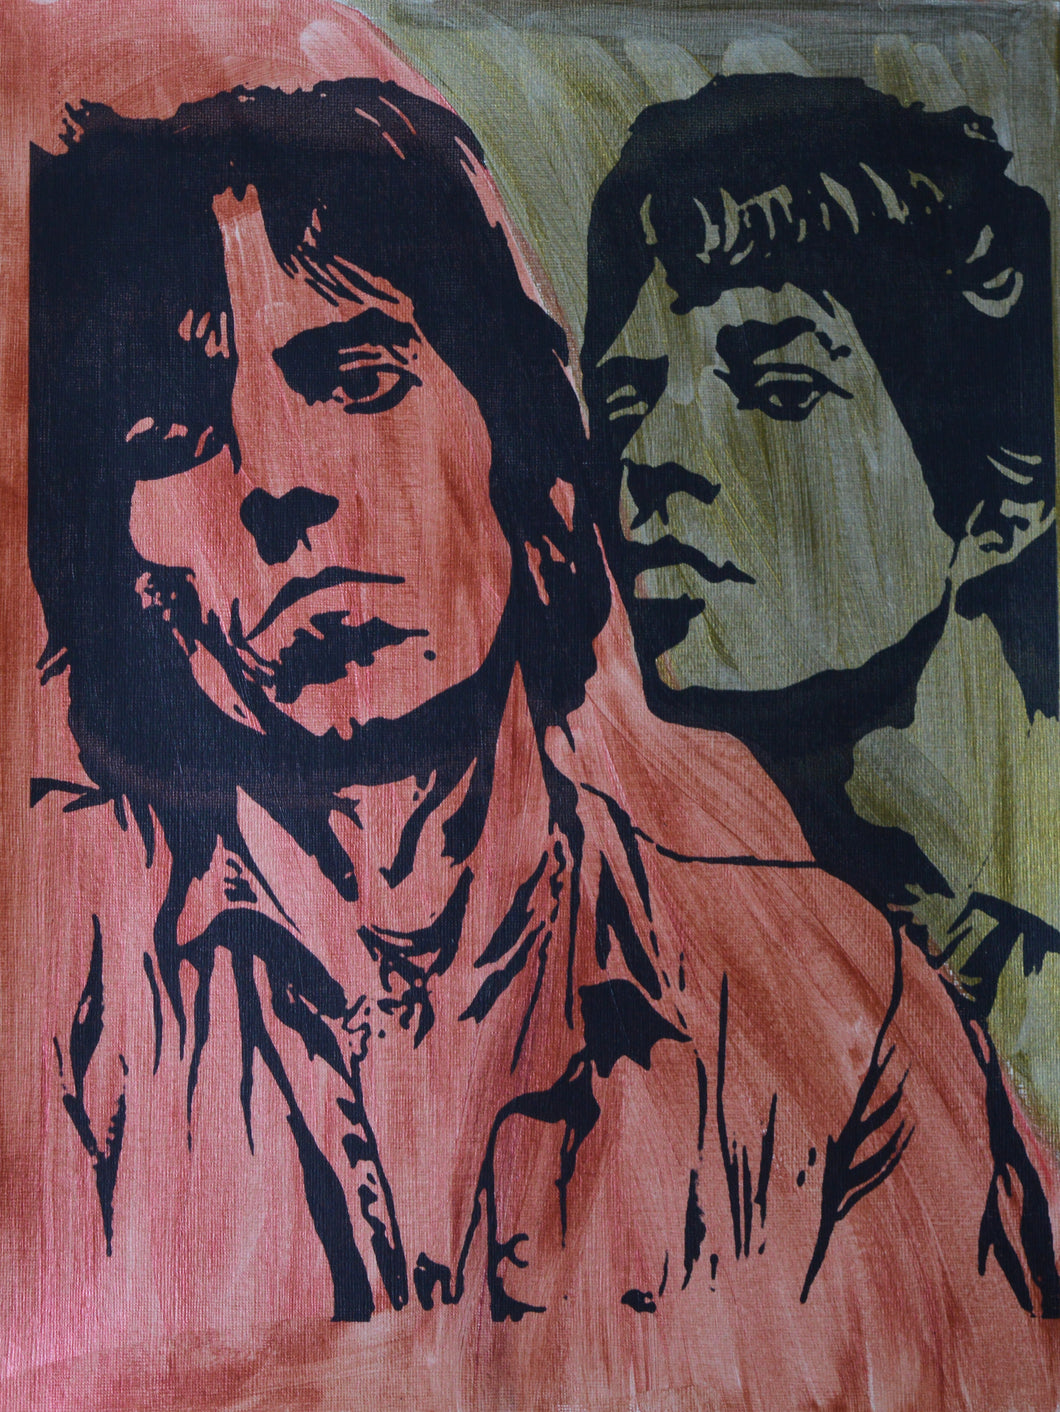 Mick and Keith Screen Print Hand Painted Background 2 - Melissa O'Brien Art